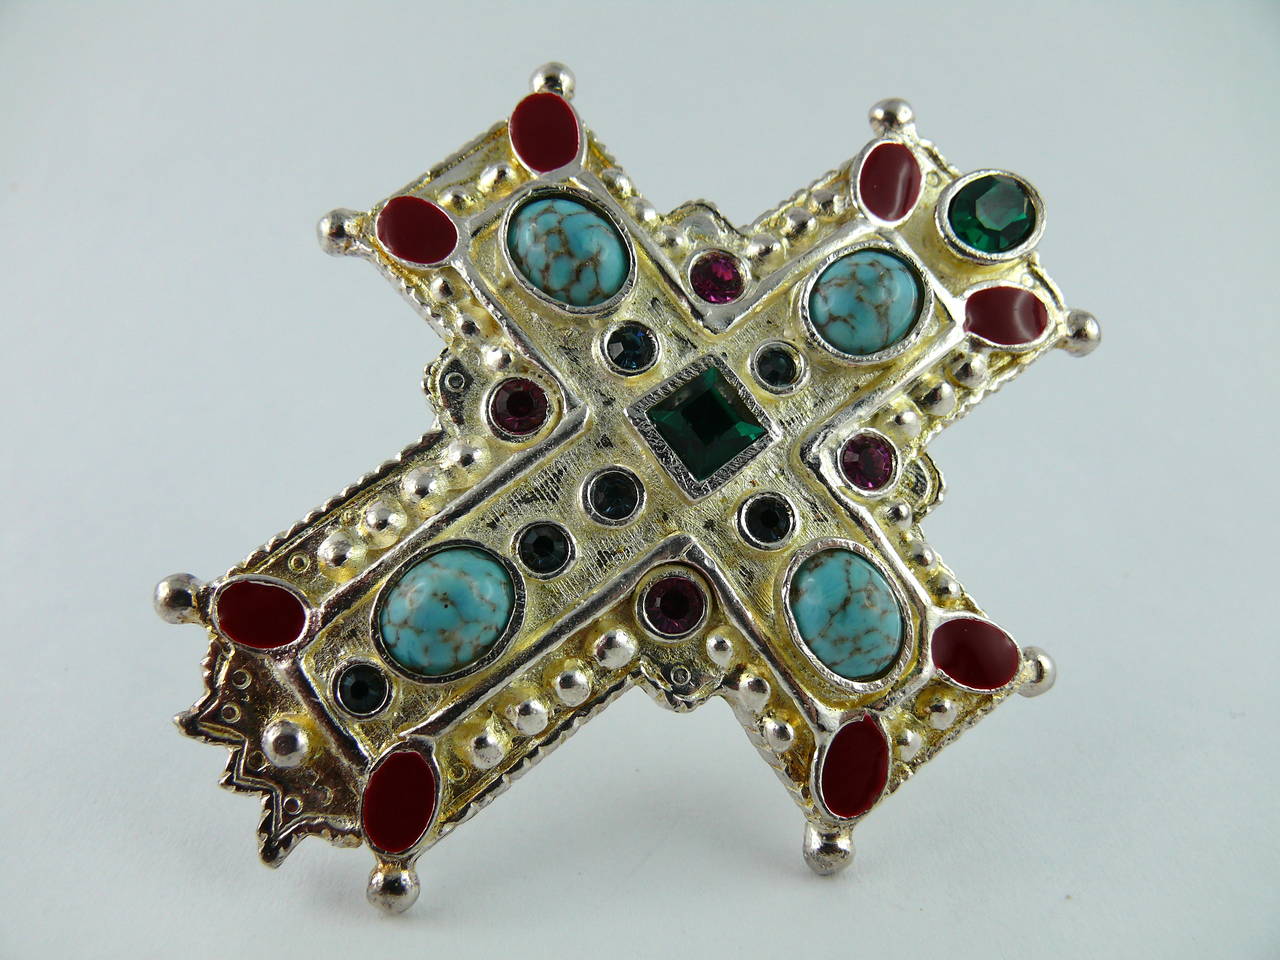 CHRISTIAN LACROIX vintage rare massive jewelled Medieval inspired cross brooch pendant.

Detailed silver tone metal embellished with multicolored crystals, faux turquoise stones and red enamel.

Can be worn as a brooch or a pendant.

Marked